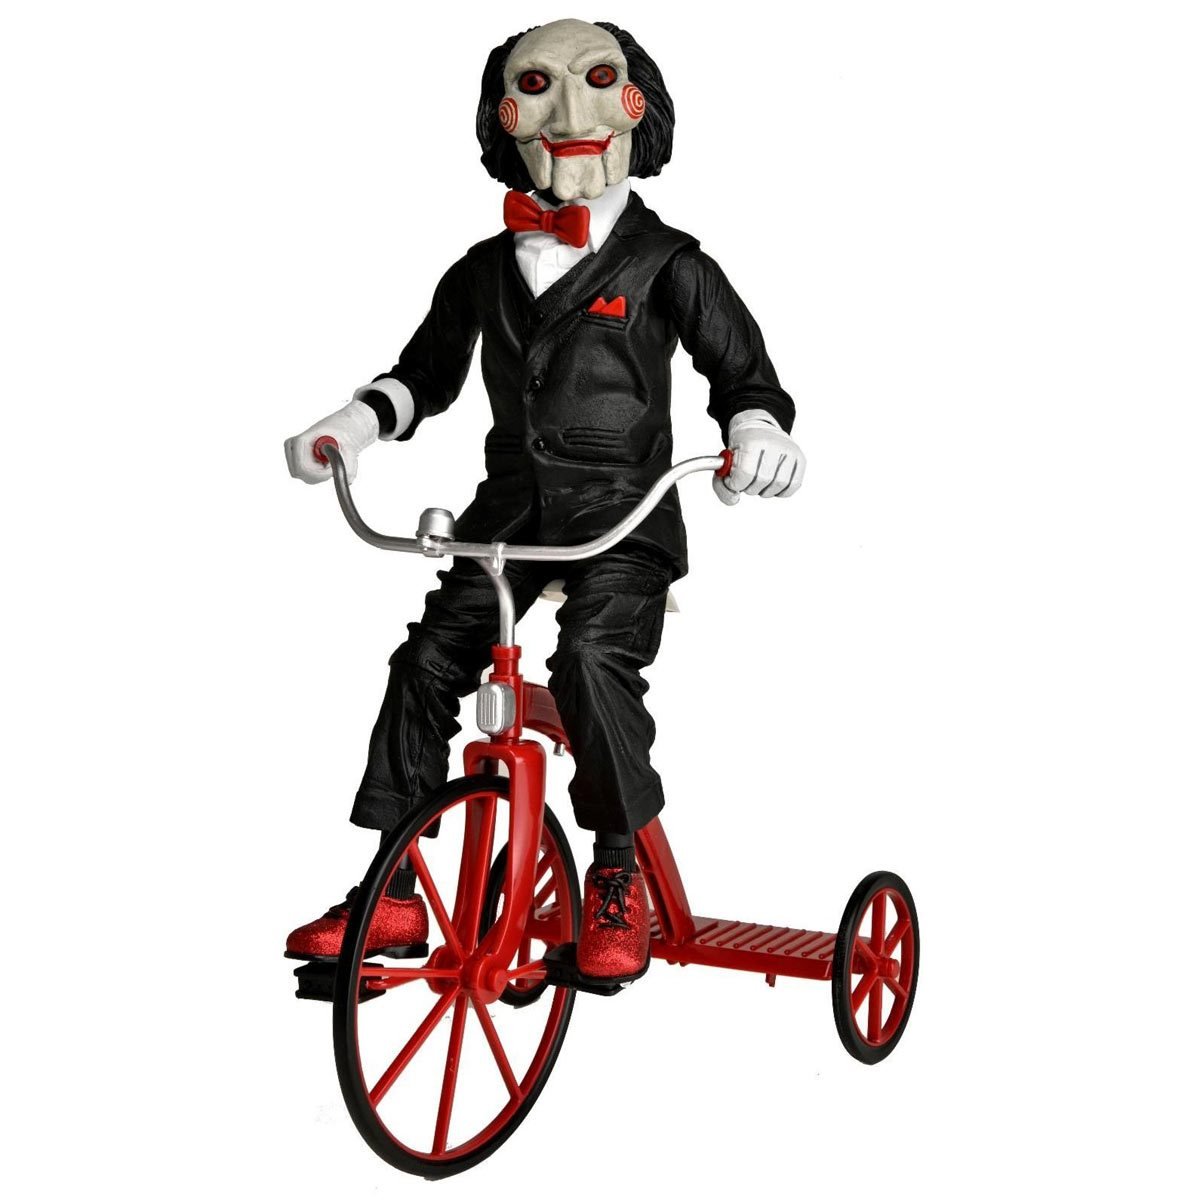 Saw Billy the Puppet 12 Inch With Sound on Tricycle arqi.com.ar